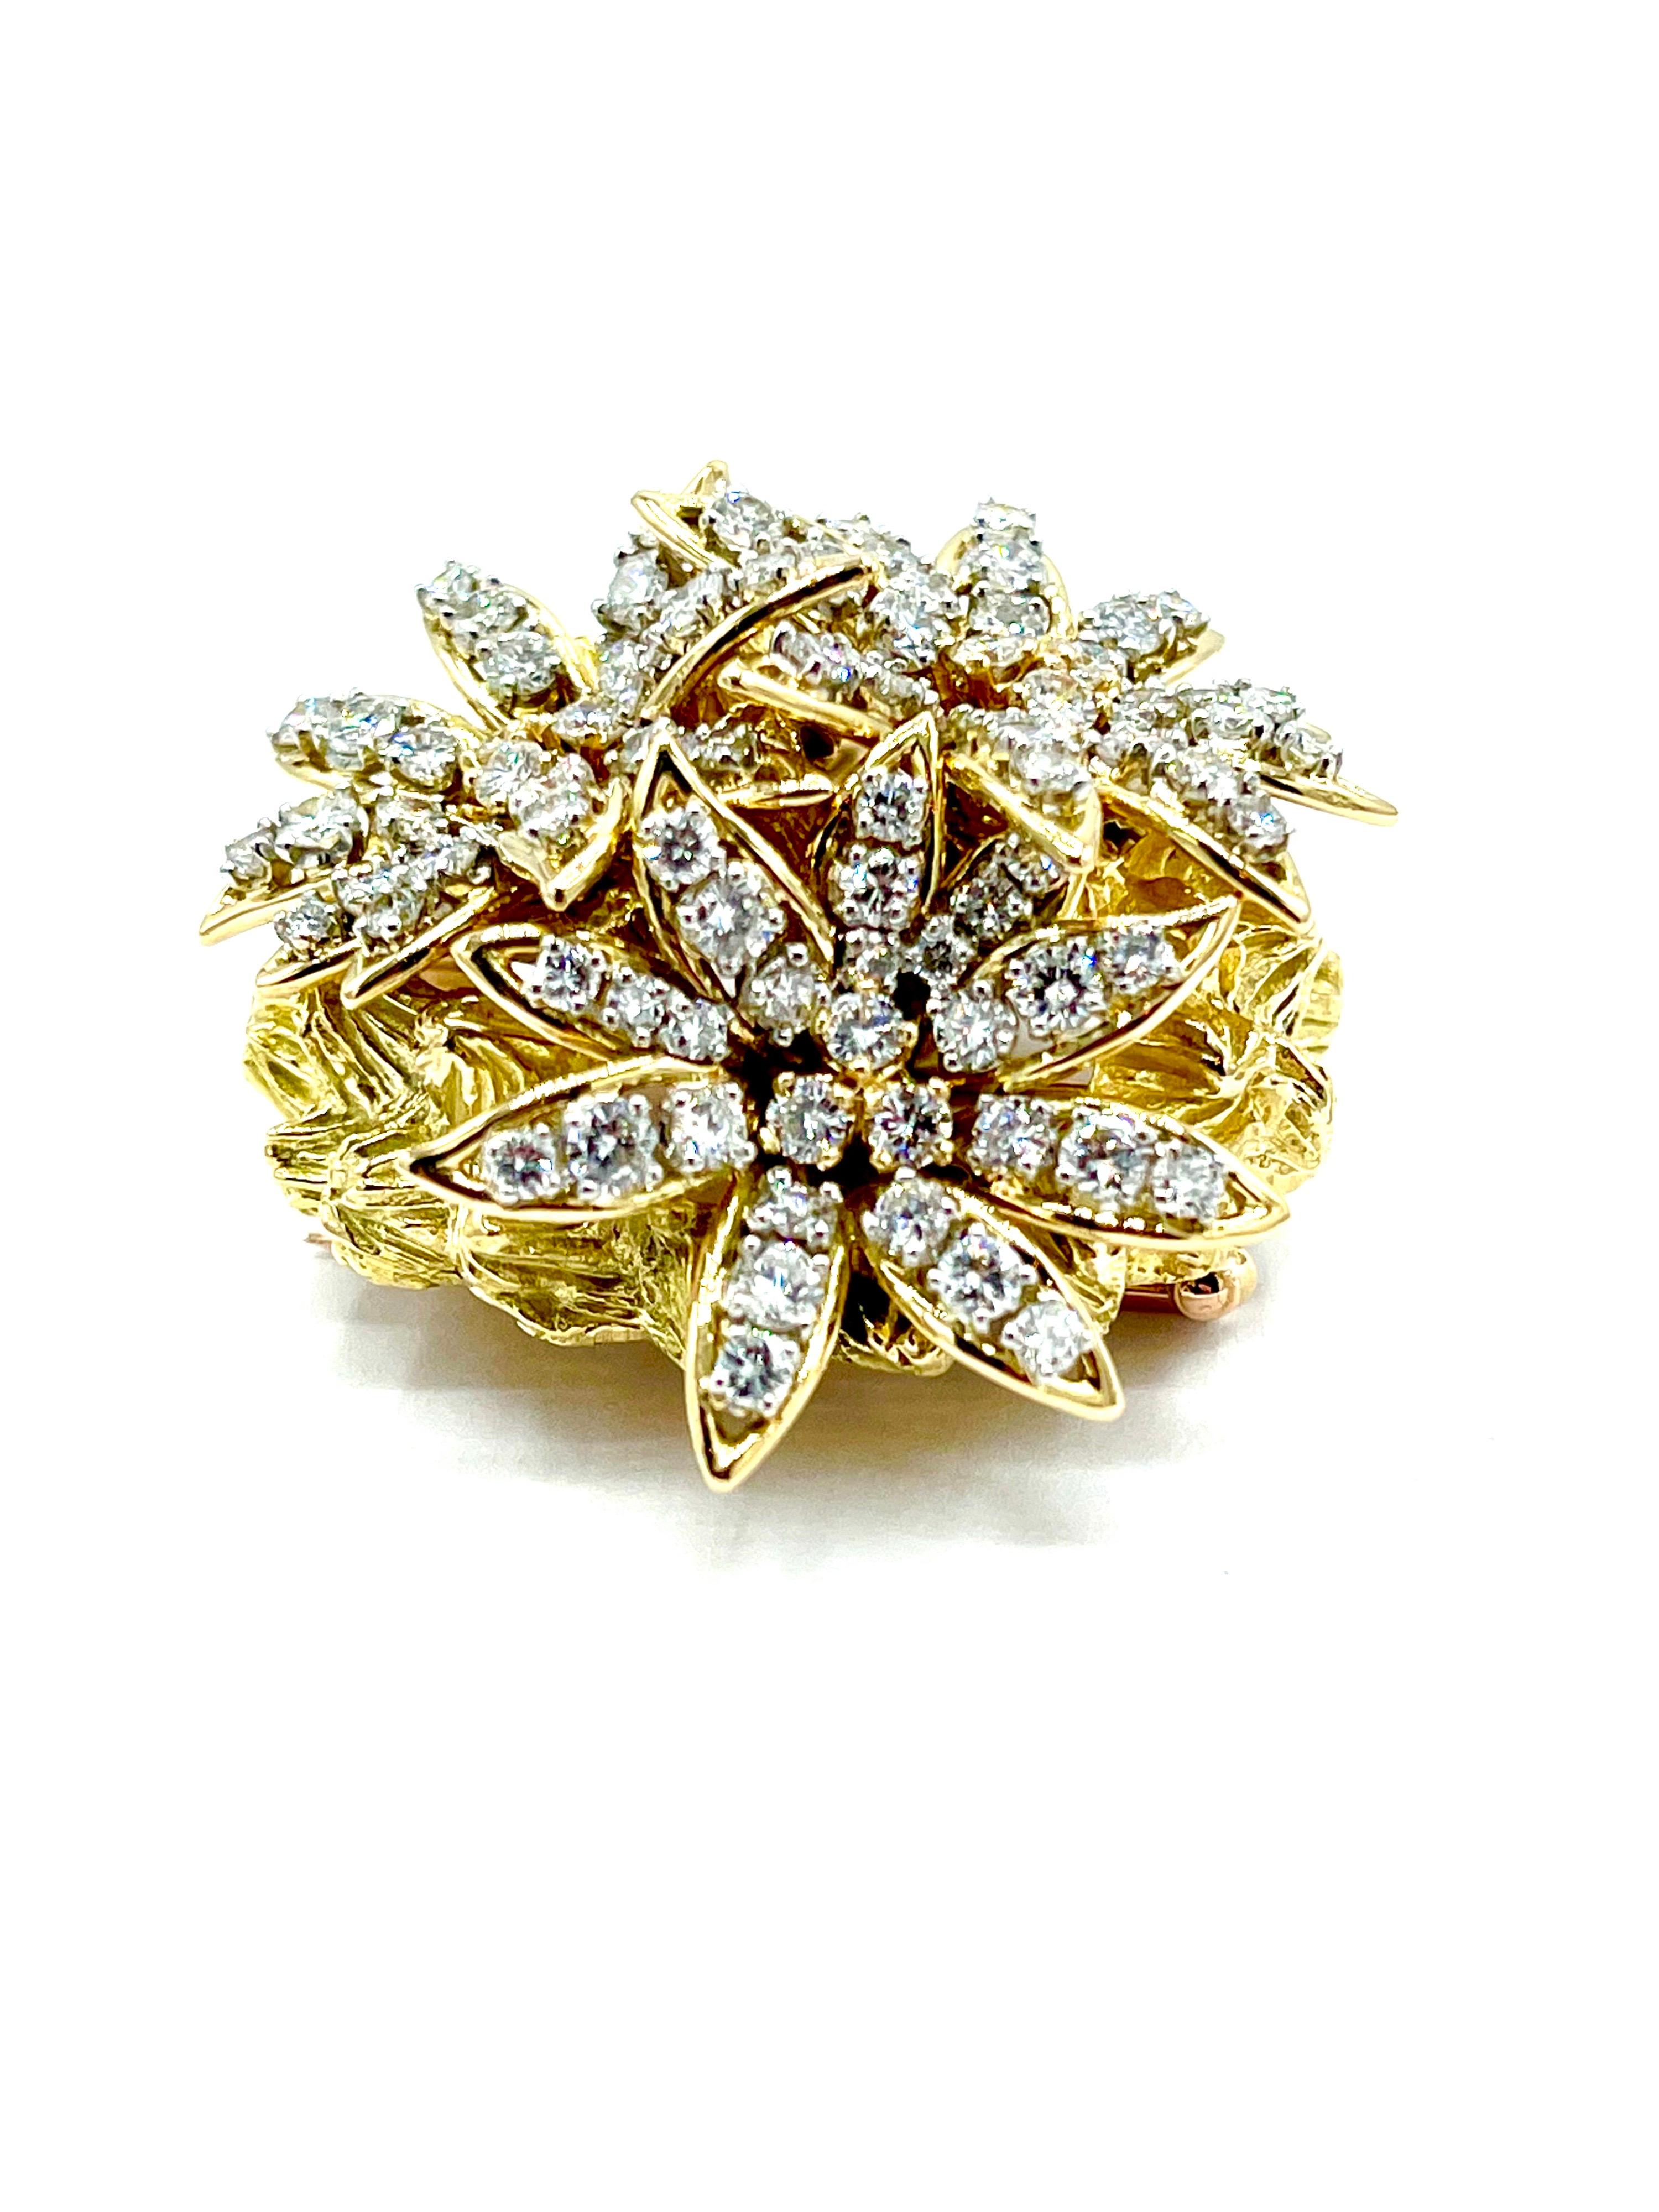 Women's or Men's French 3.60 Carat Round Brilliant Diamond Domed 18k Floral Brooch For Sale